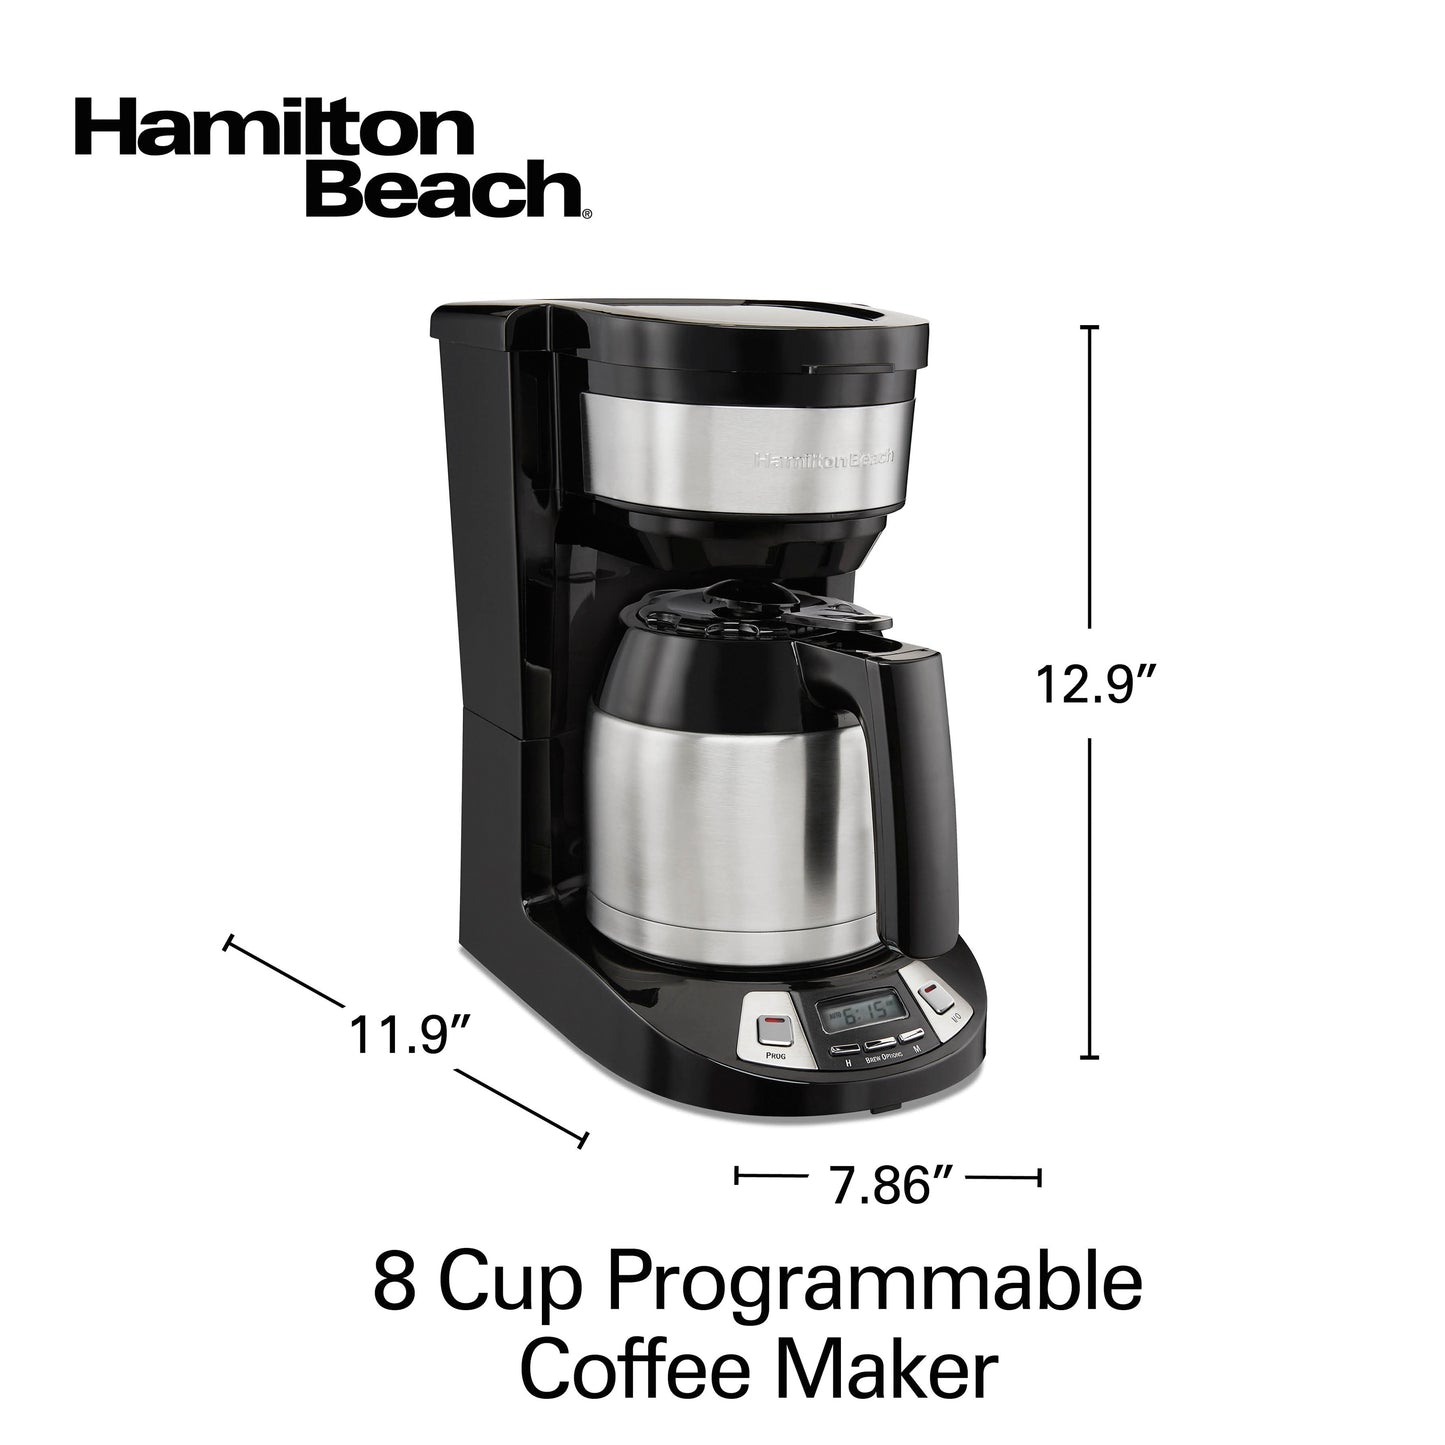 Hamilton Beach Programmable 8 Cup Coffee Maker, Thermal Carafe, Black & Stainless, Model 46240